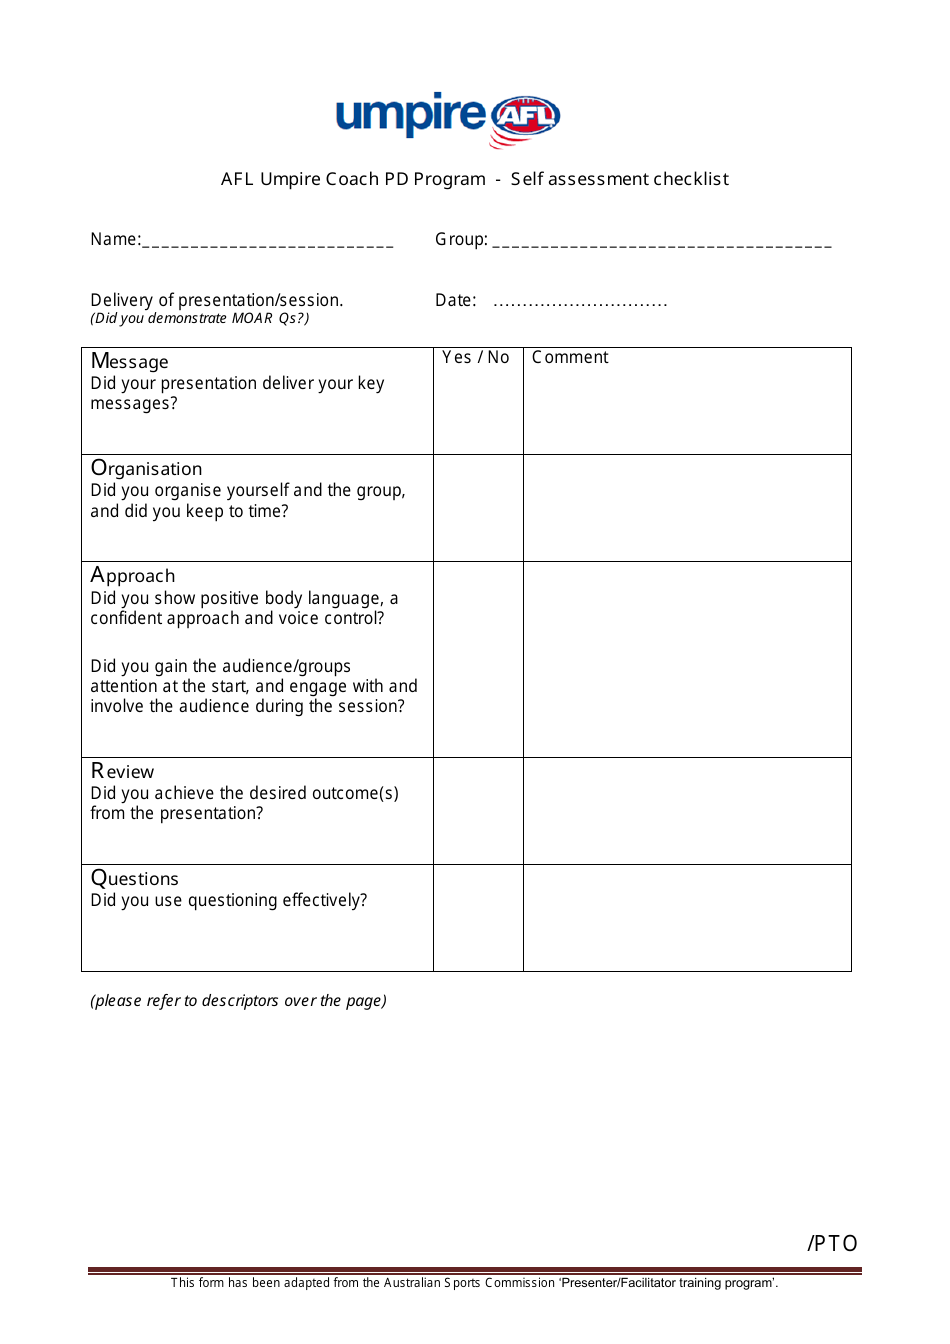 Self Assessment Checklist Template Umpire AFL - Preview Image